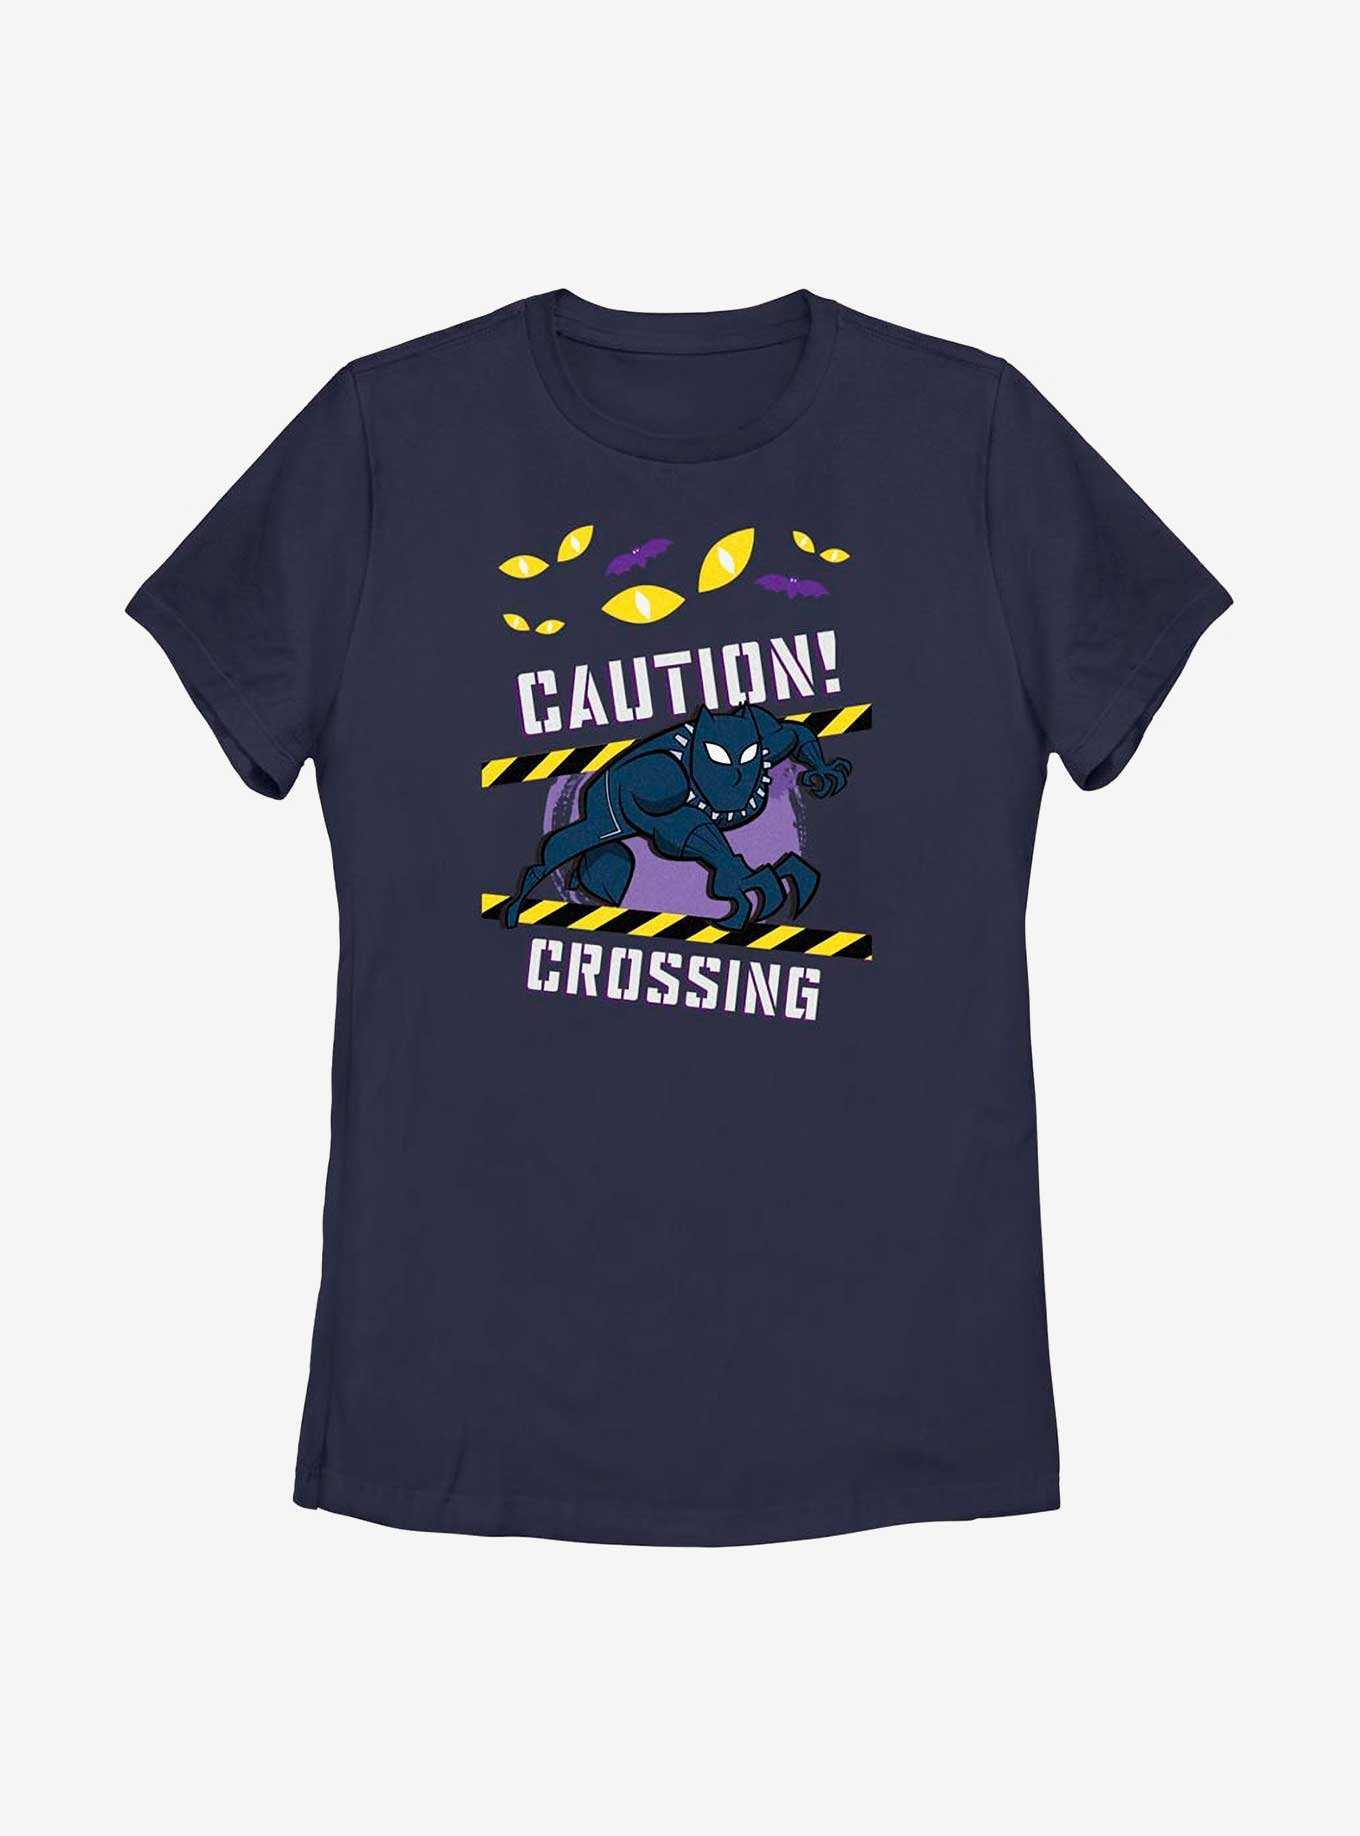 Marvel Black Panther Caution Crossing Womens T-Shirt, , hi-res